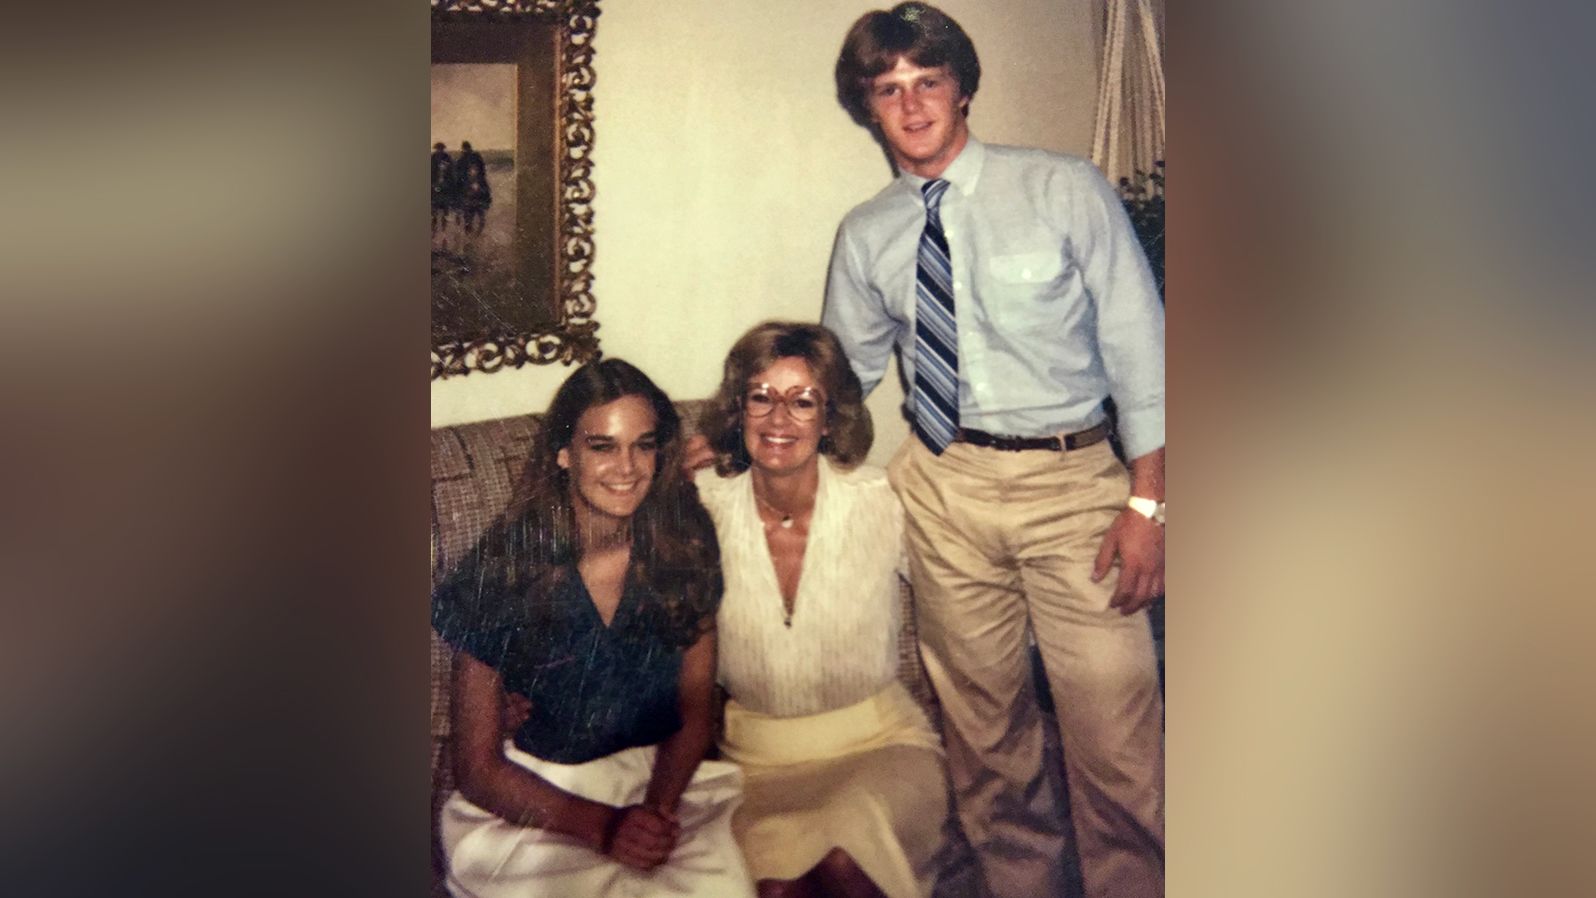 Brent Wright's sister Shelly and mother Karen pose for a photo after his high school graduation in 1981.